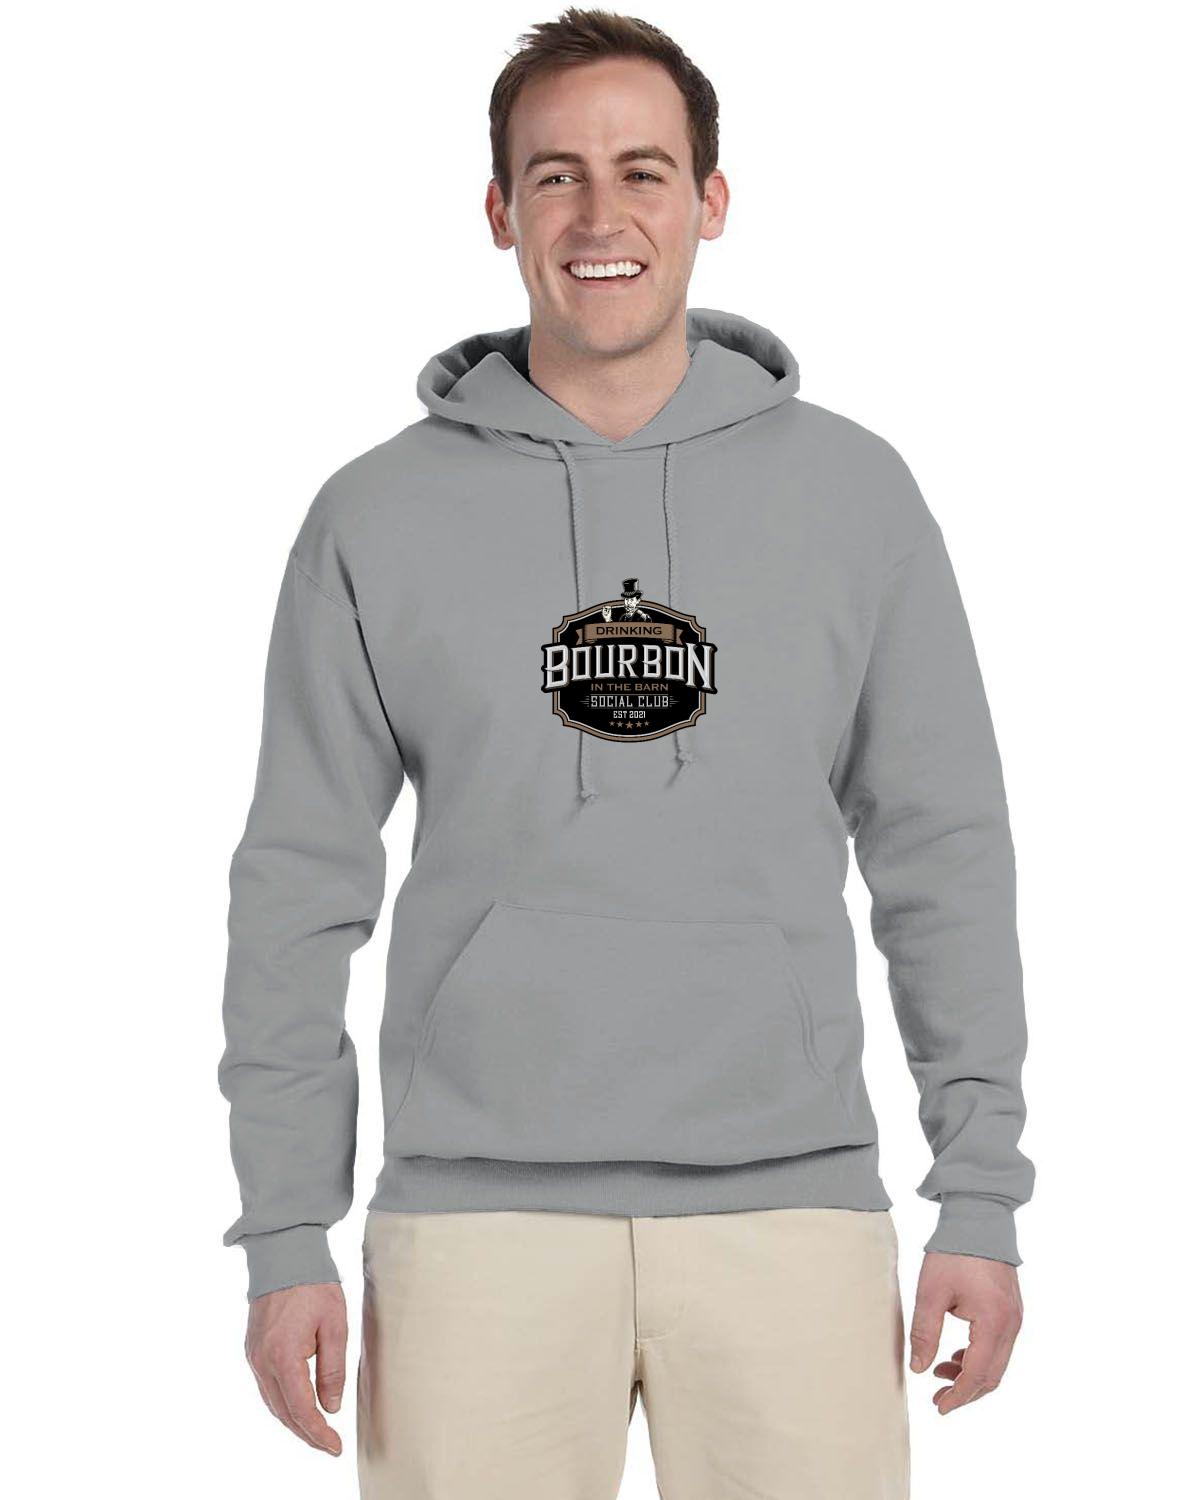 Drinking Bourbon in the barn social club official logo hoodie